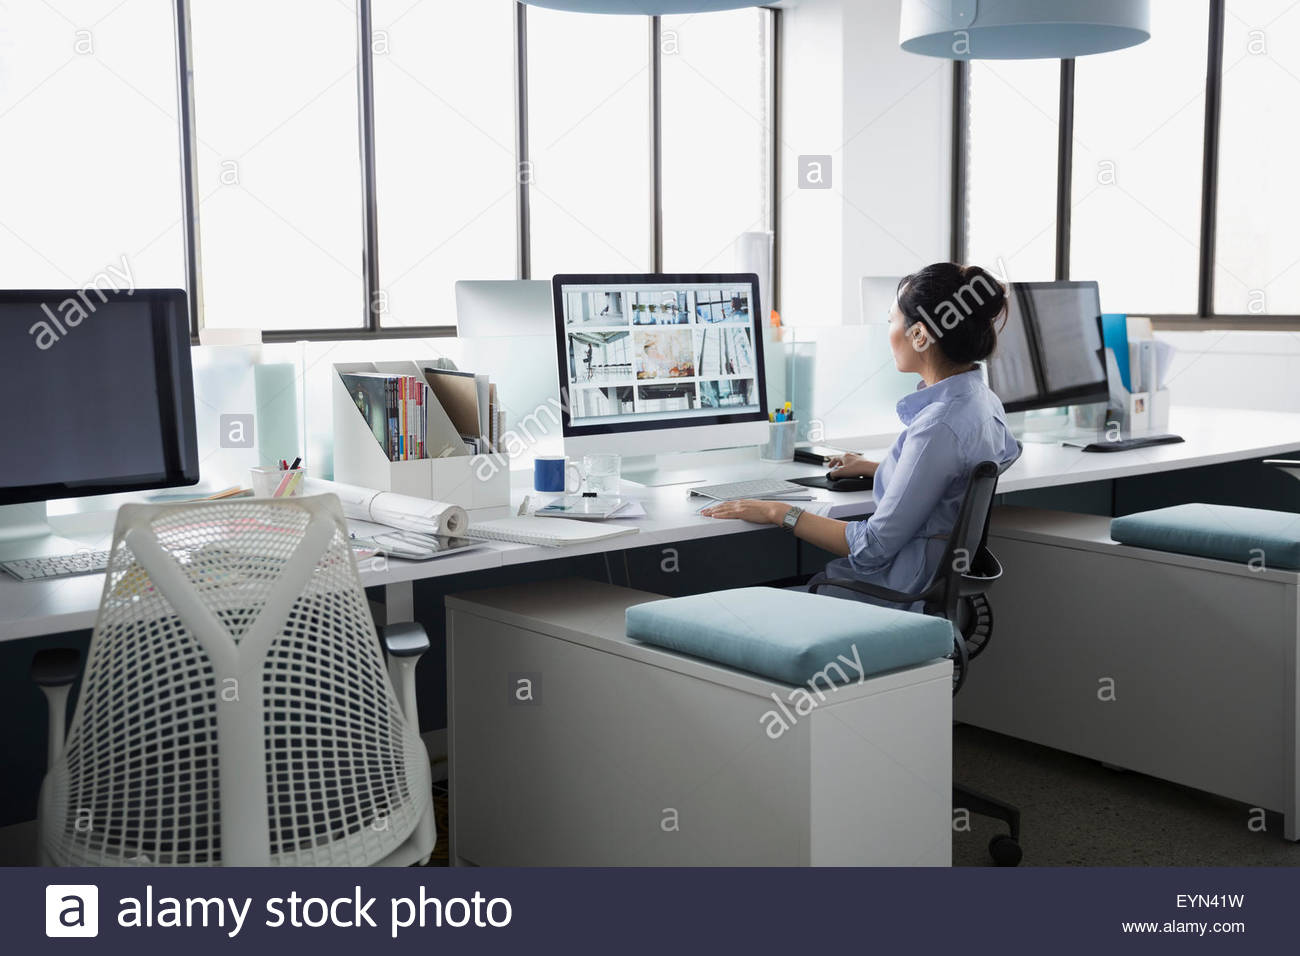 Designer working at computer in office Stock Photo